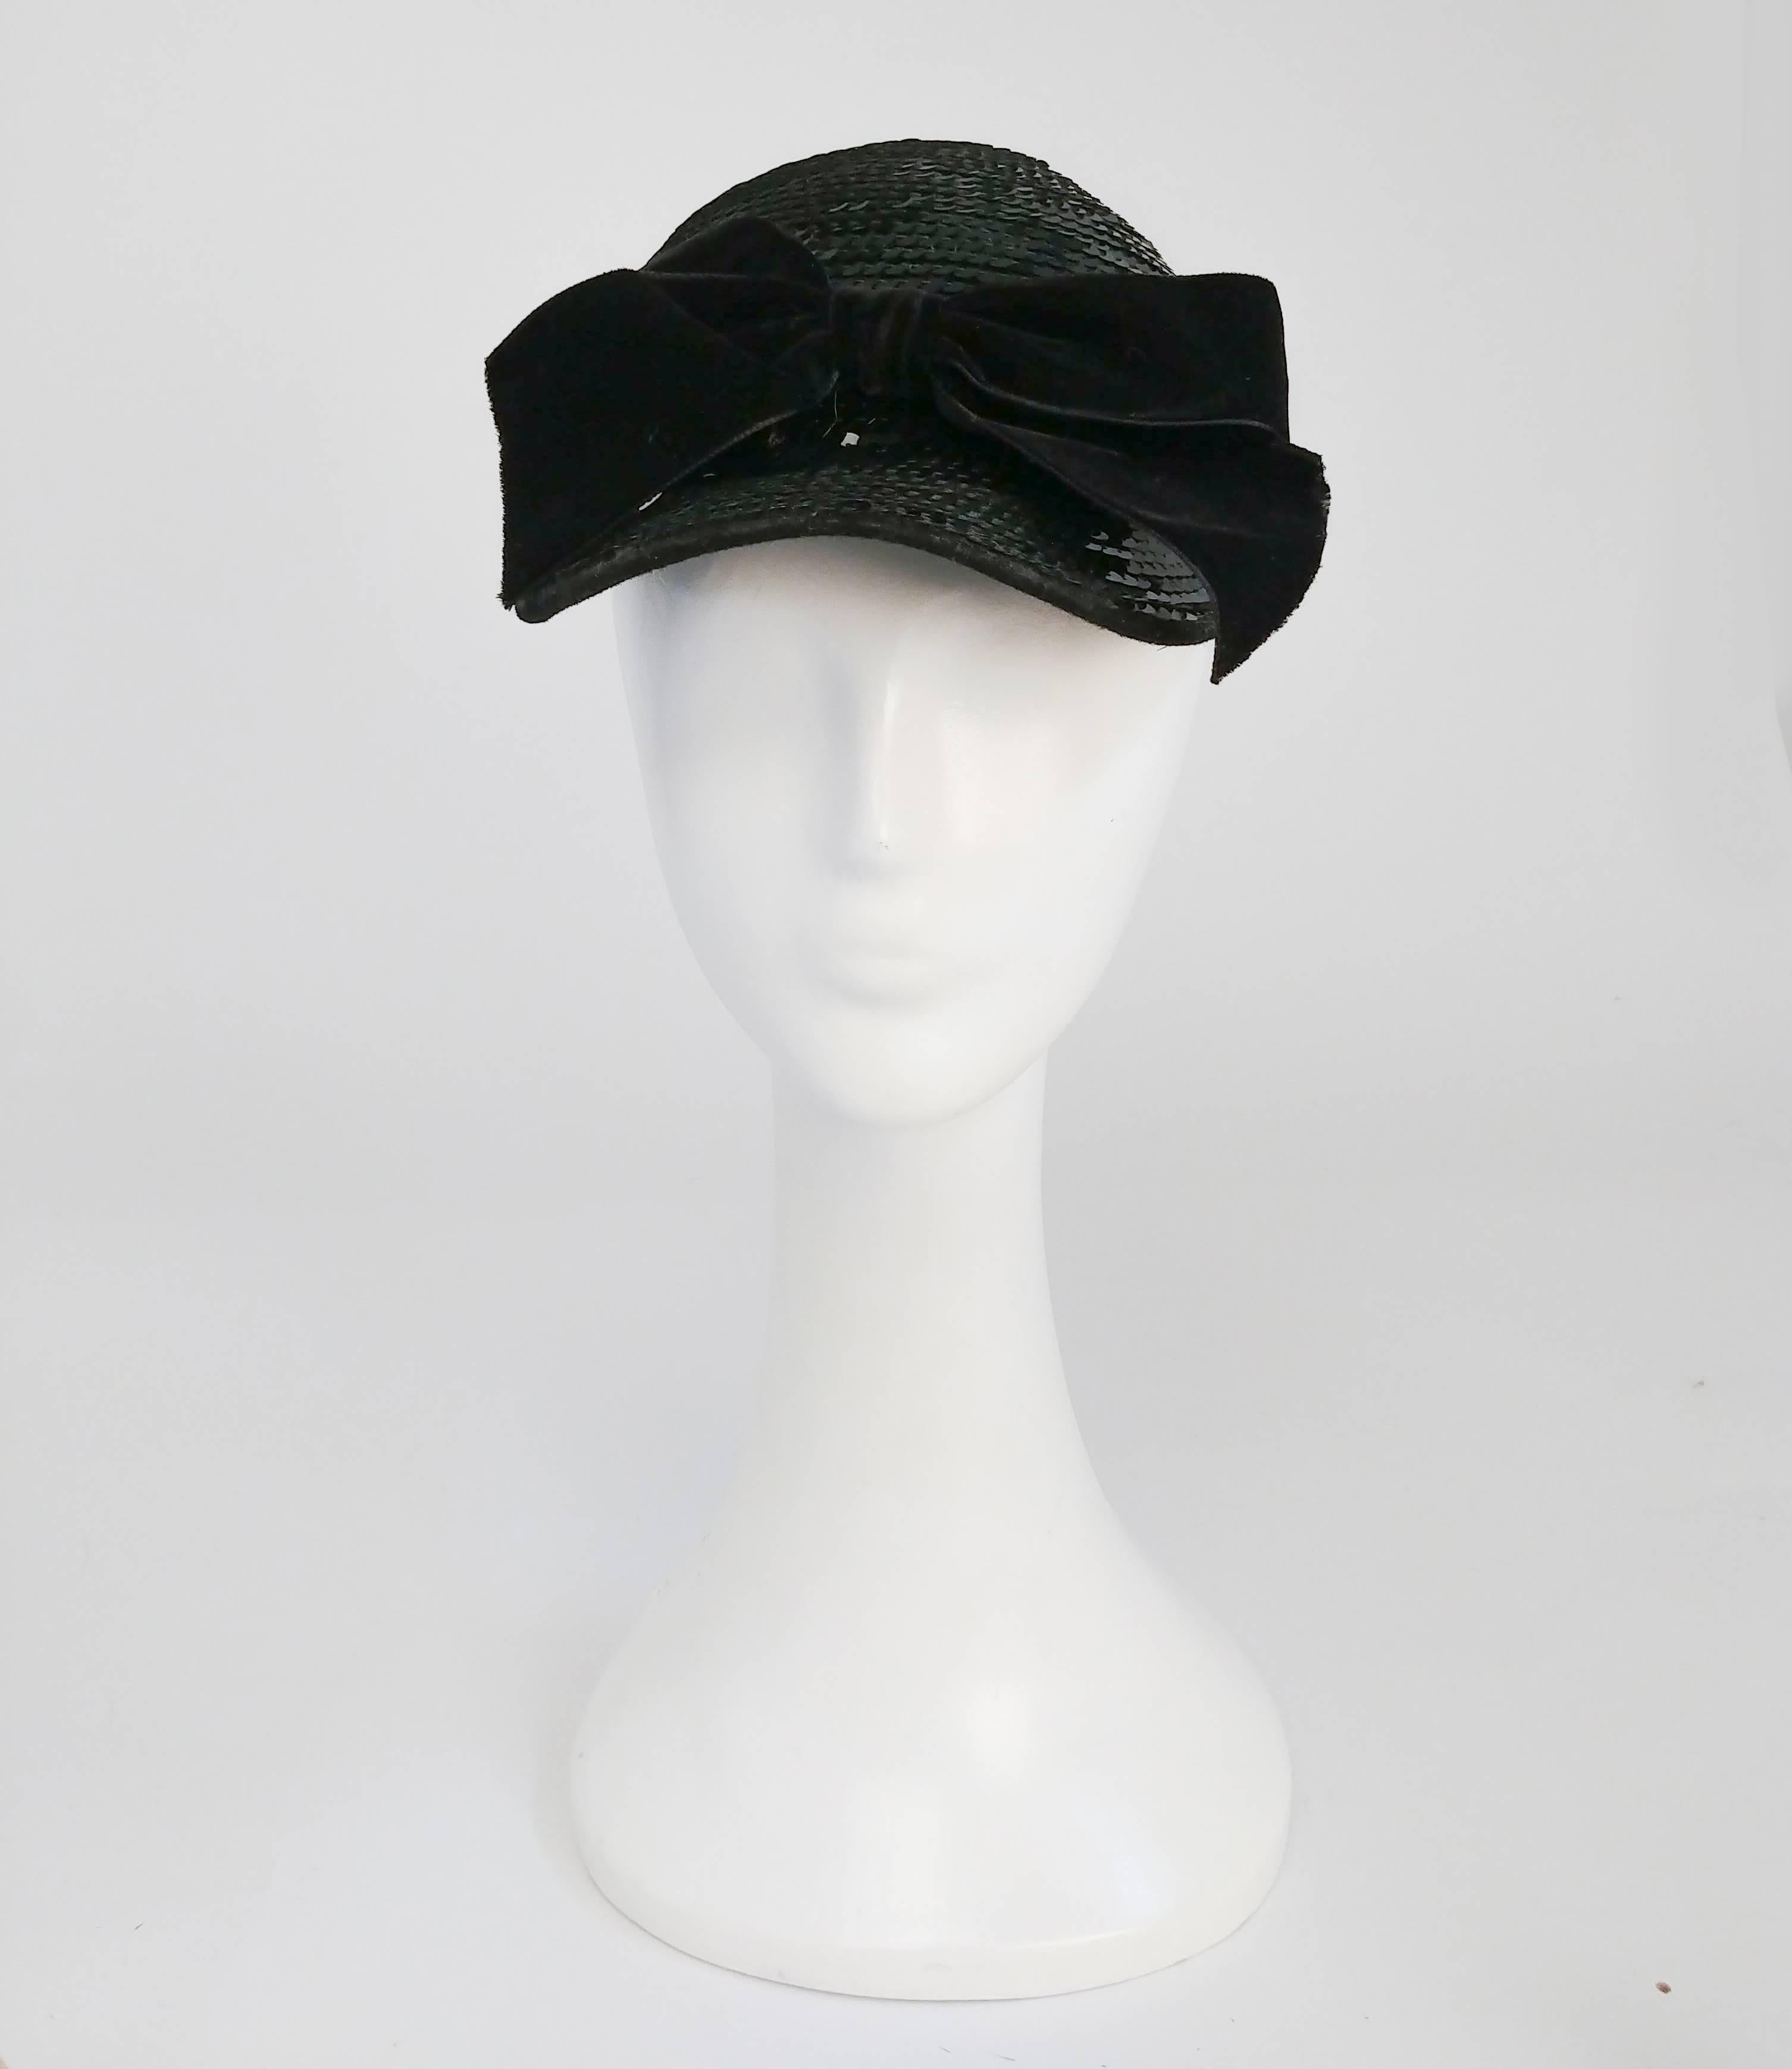 1980s Eric Javits Black Sequin Cap w/ Velvet Bow. Black cap encrusted in scequin and garnished with a velvet bow. 21 to 22 inch circumference